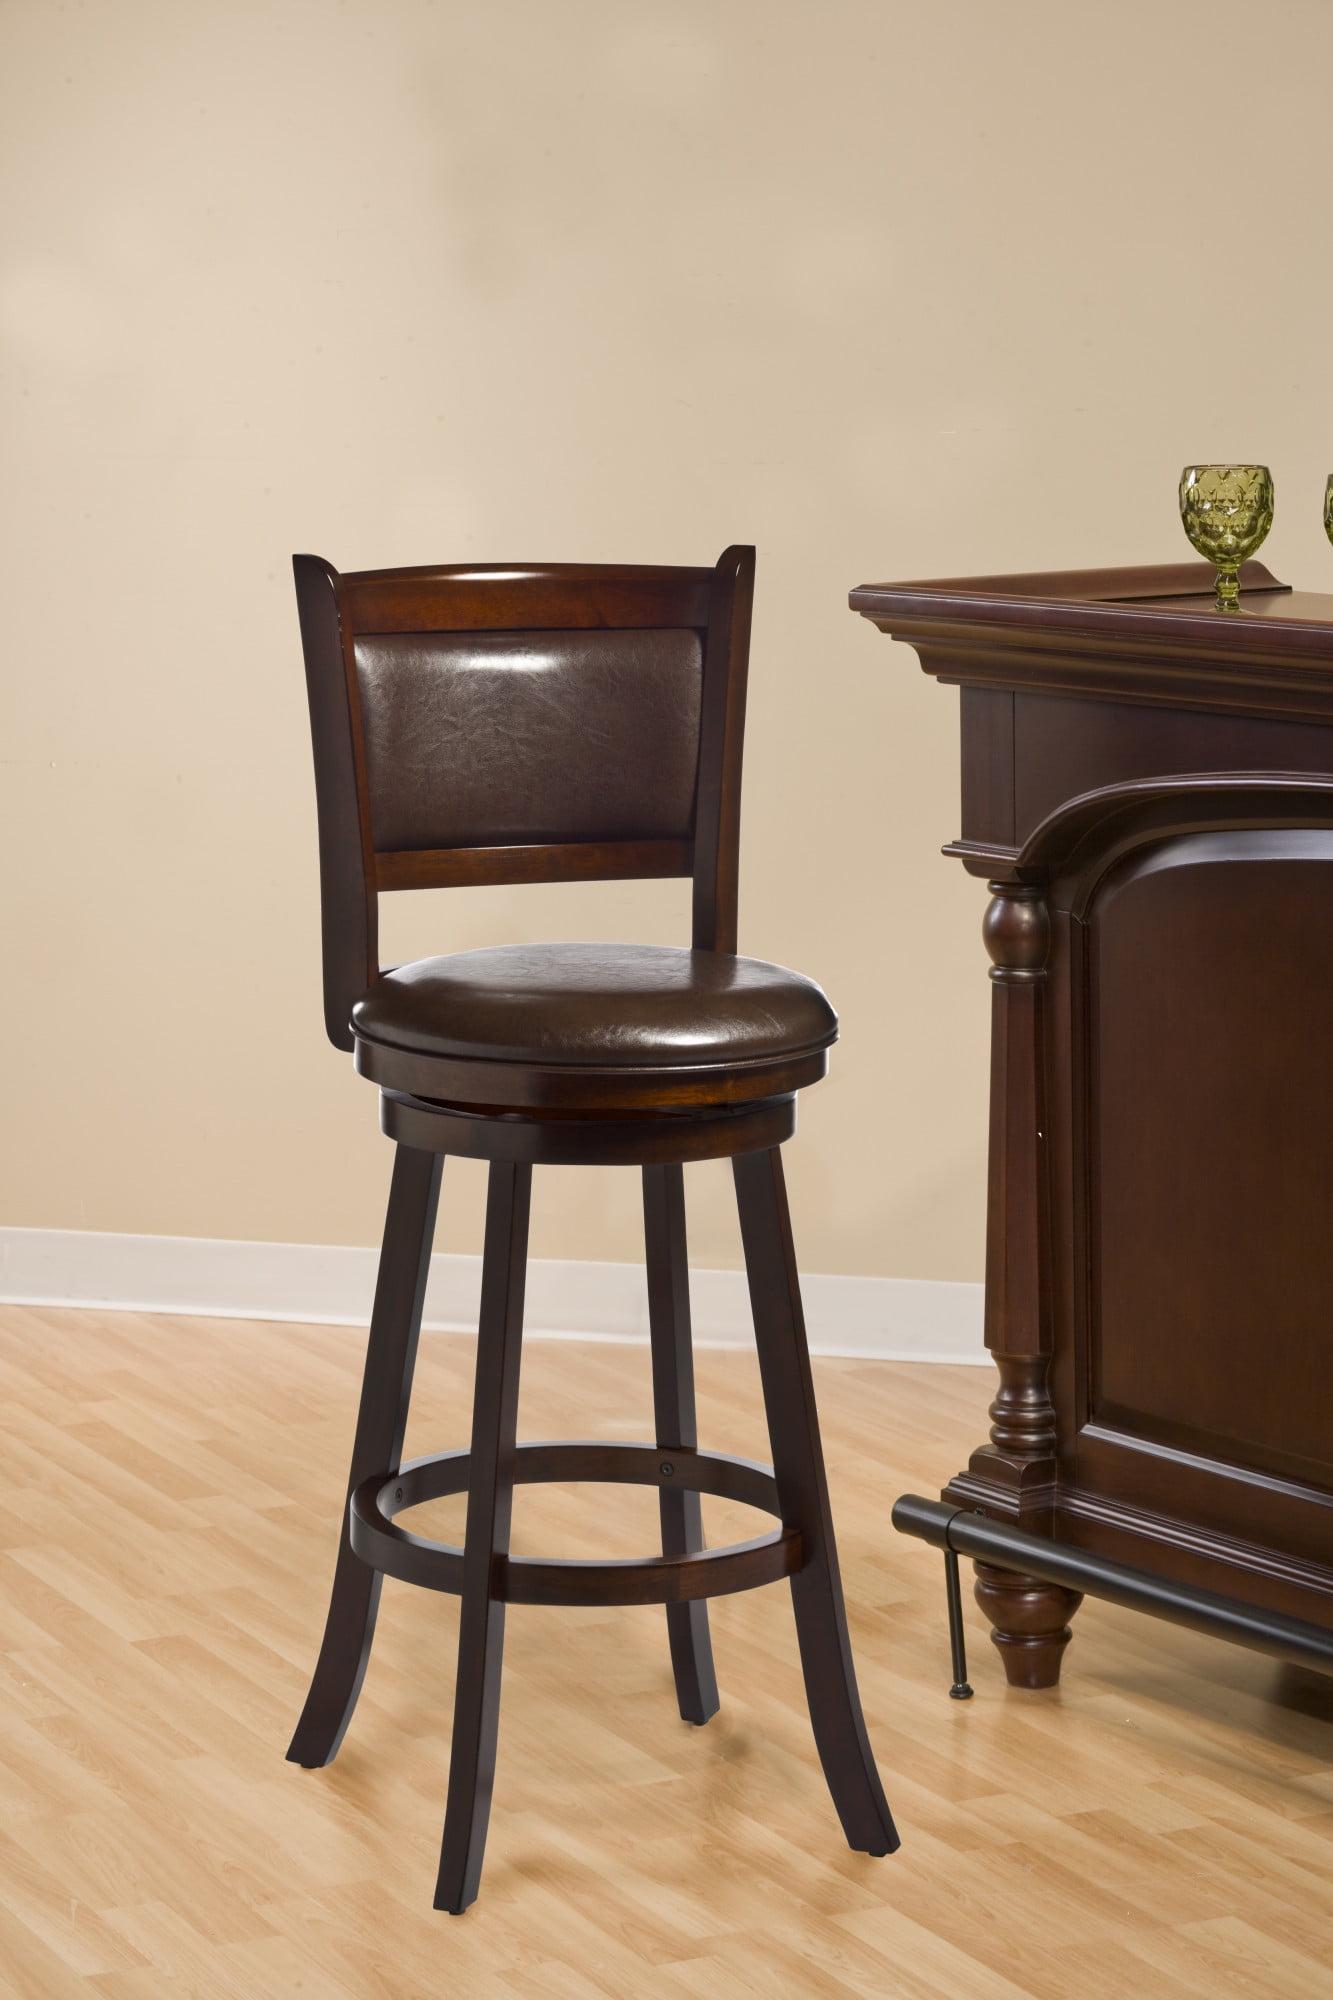 Dennery Cherry Wood Swivel Barstool with Brown Upholstery